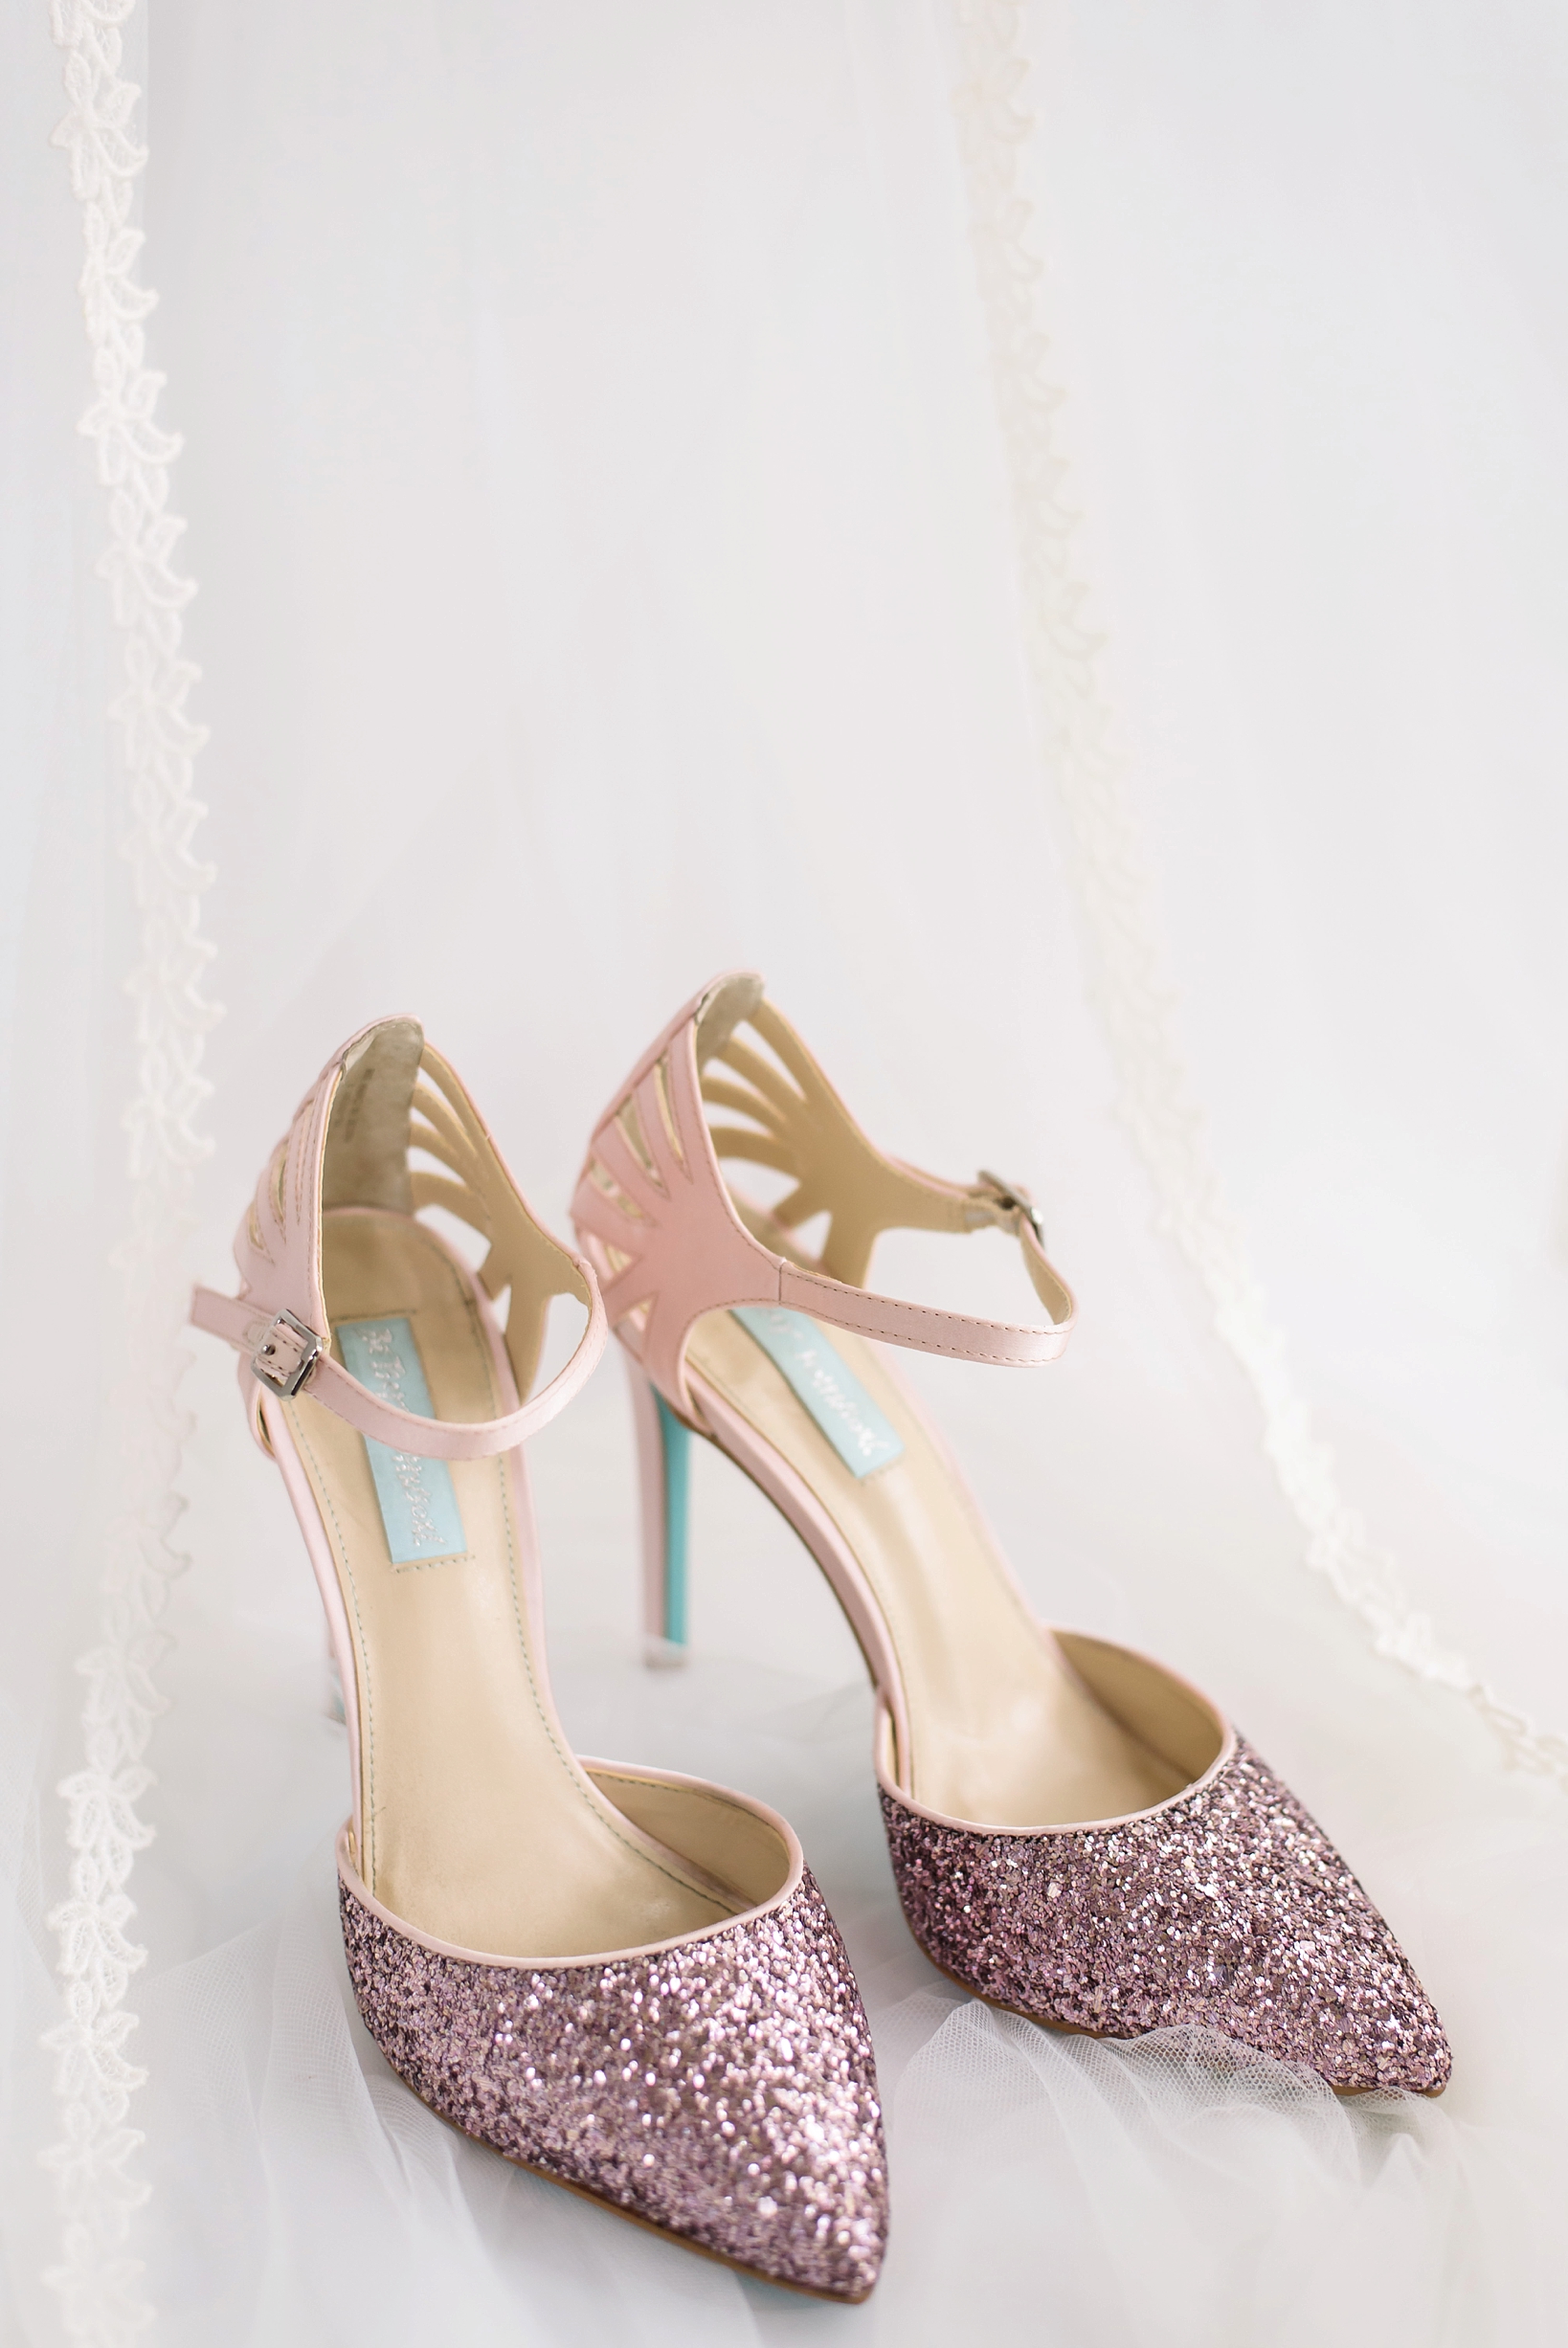 The Bride's pink glitter Betsey Johnson wedding shoes with her mothers veil as a backdrop.